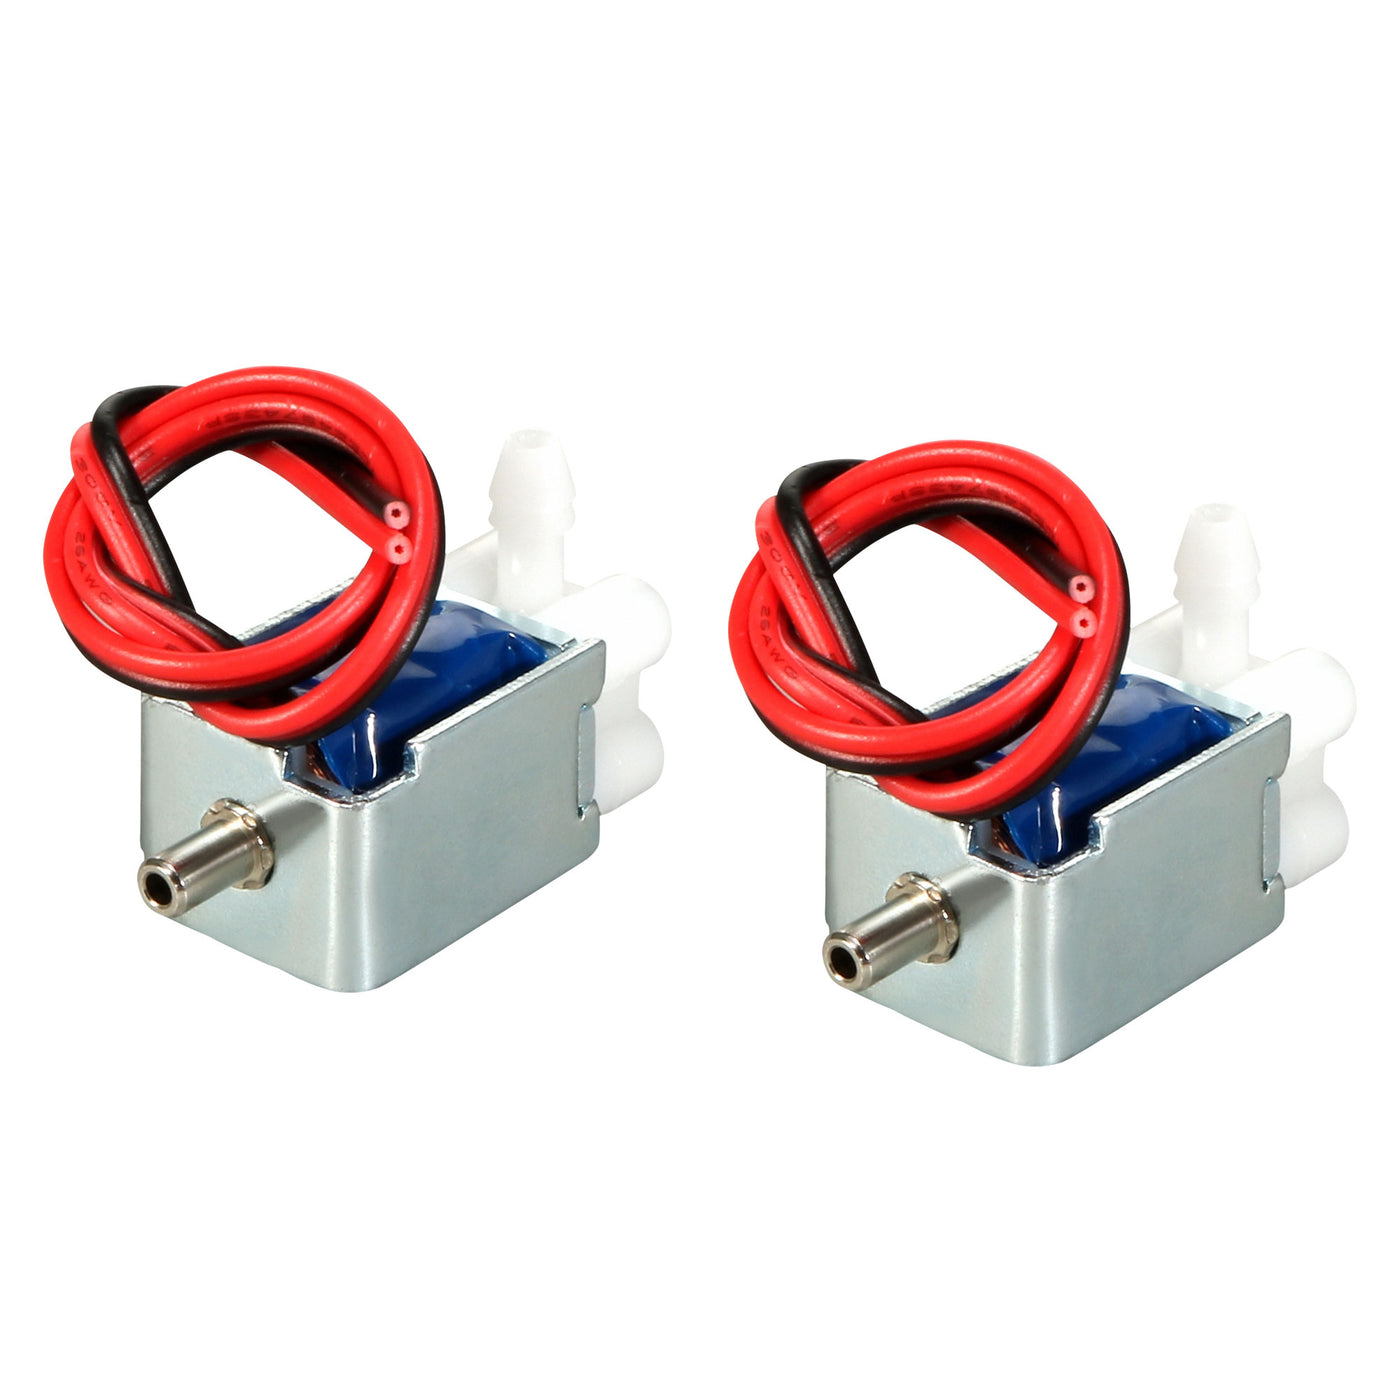 uxcell Uxcell Miniature Solenoid Valve 2 Position 3 Way DC 12V 0.2A Air Solenoid Valve, 2pcs